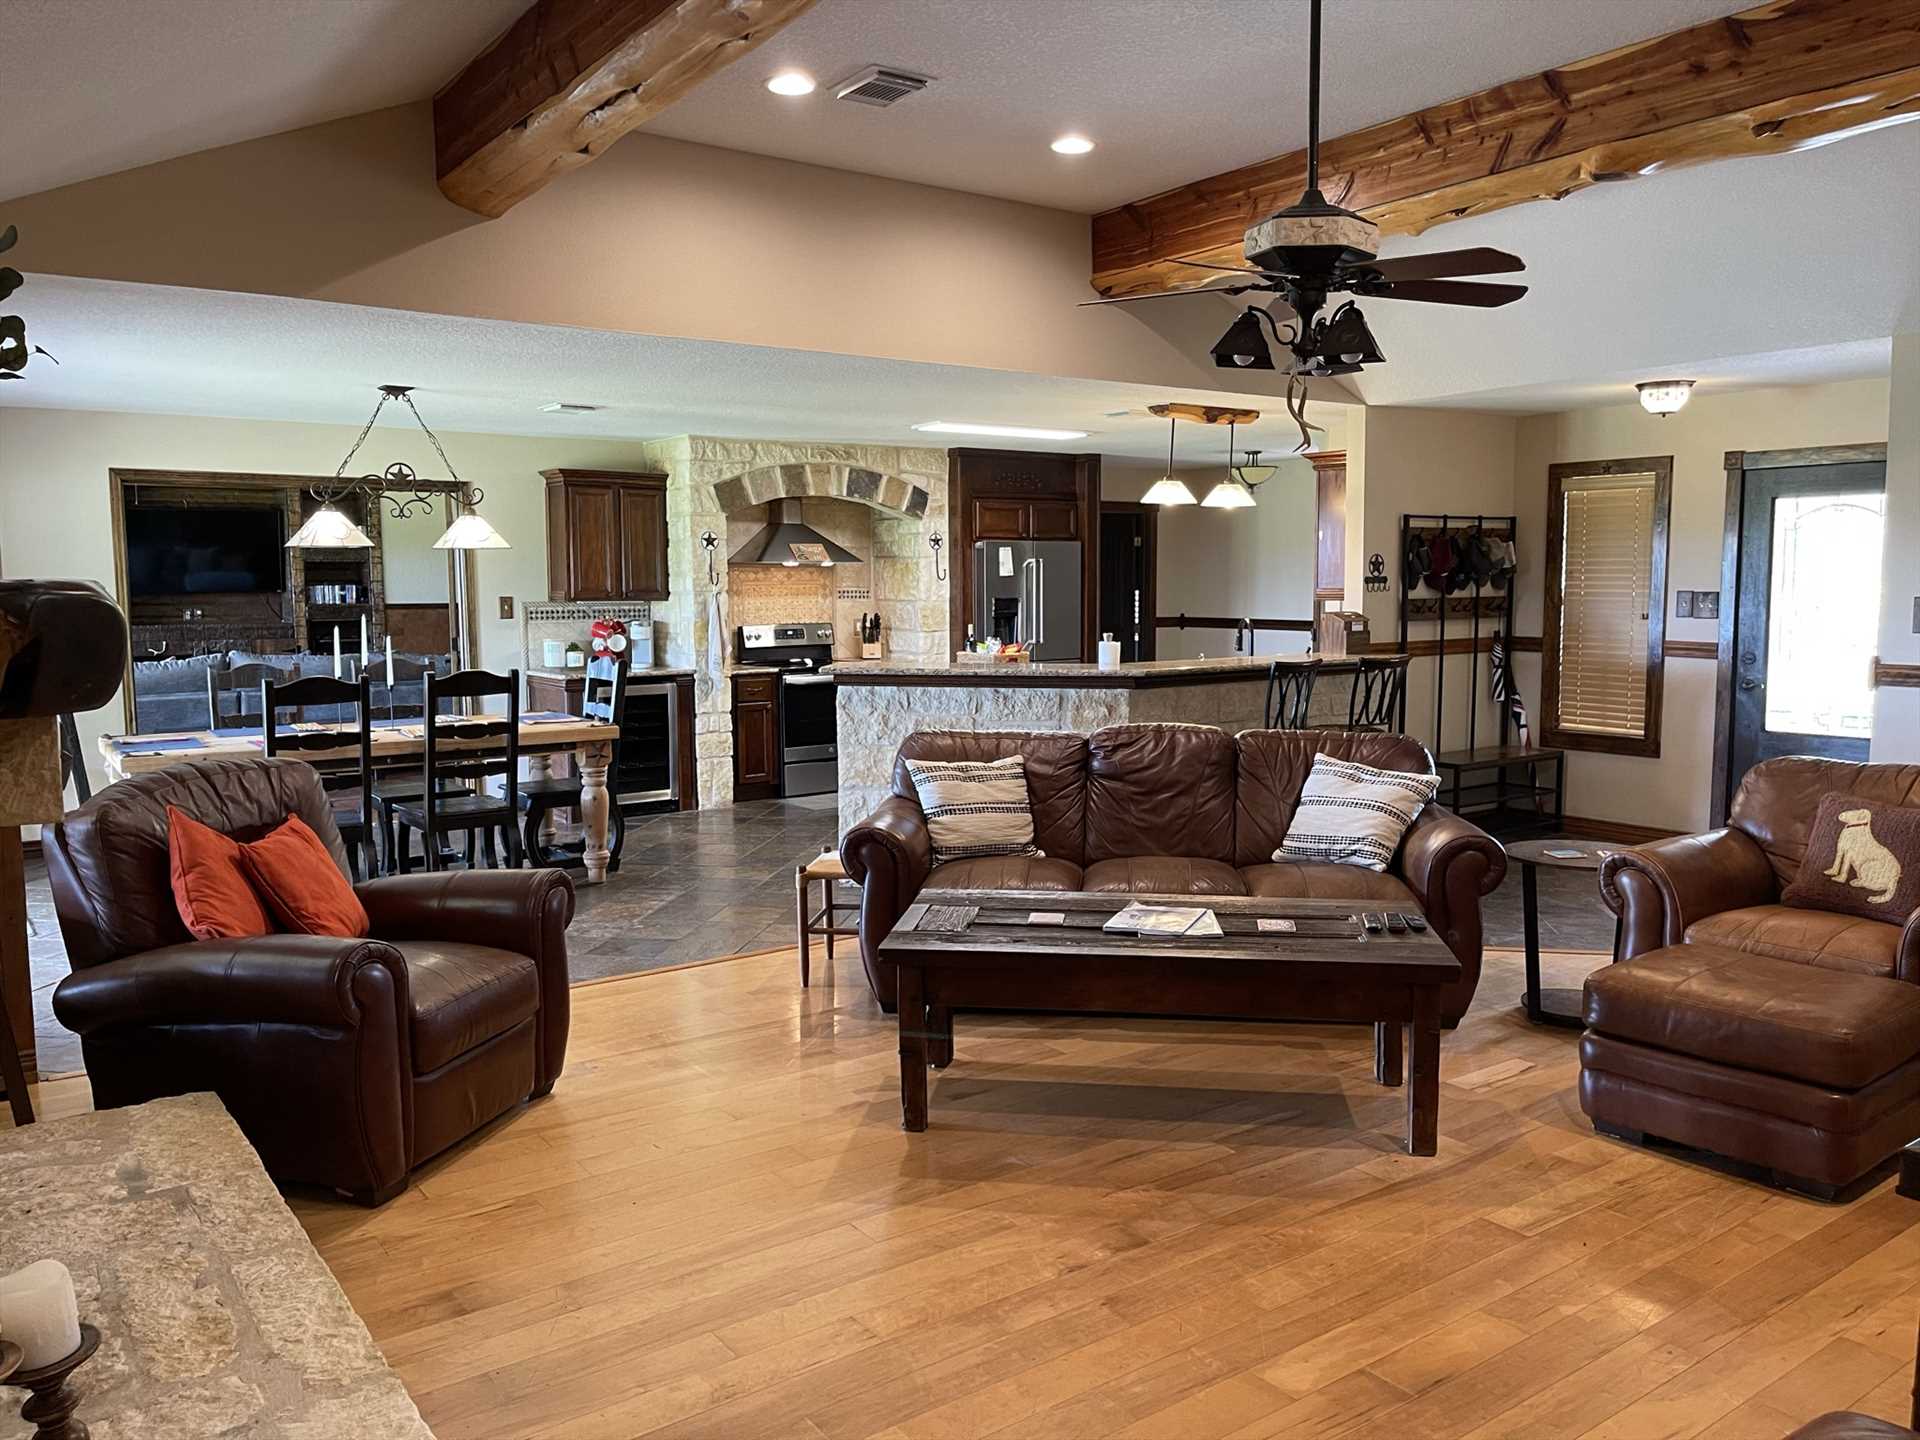                                                 The wide-open layout of the living area, dining area, and kitchen gives your crew a sense of togetherness, even when they're in different rooms.